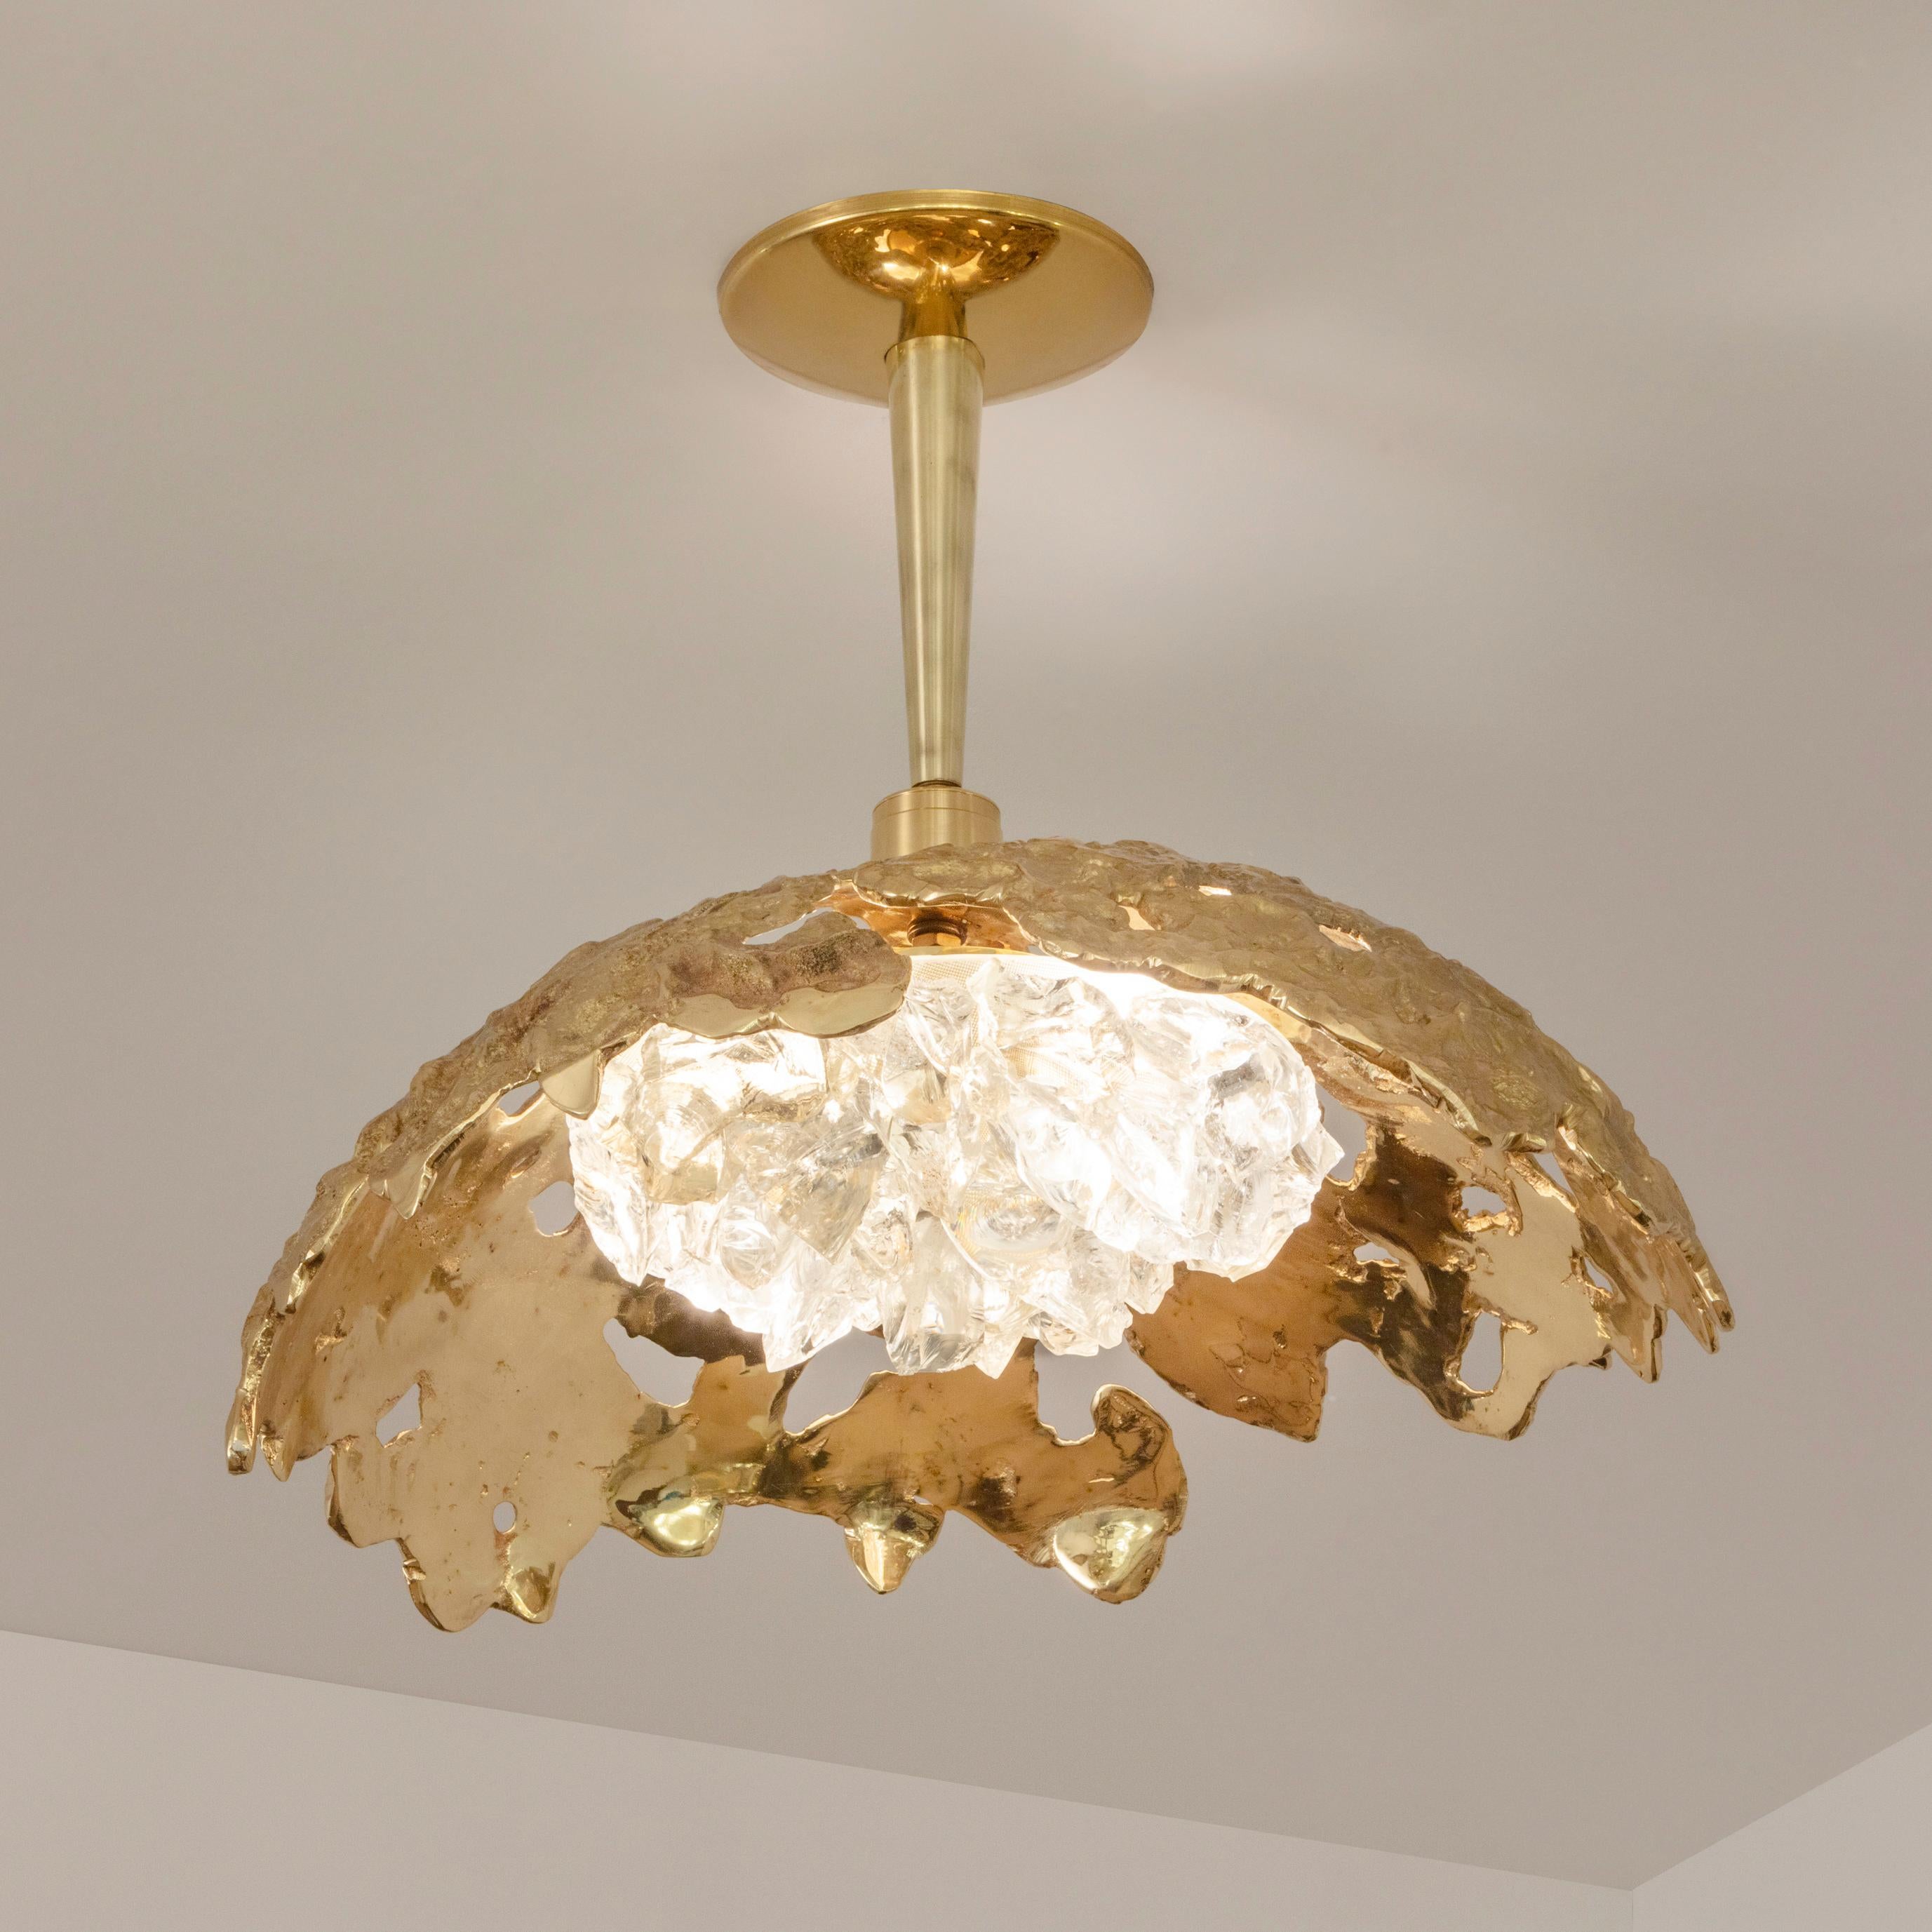 Blending sculpture and design, the N.15 is the intermediate fixture of the Etna series with a glass shade composed of dozens of crystal elements. The organic cast brass shell culminates in a polished stem and canopy. The first images show the